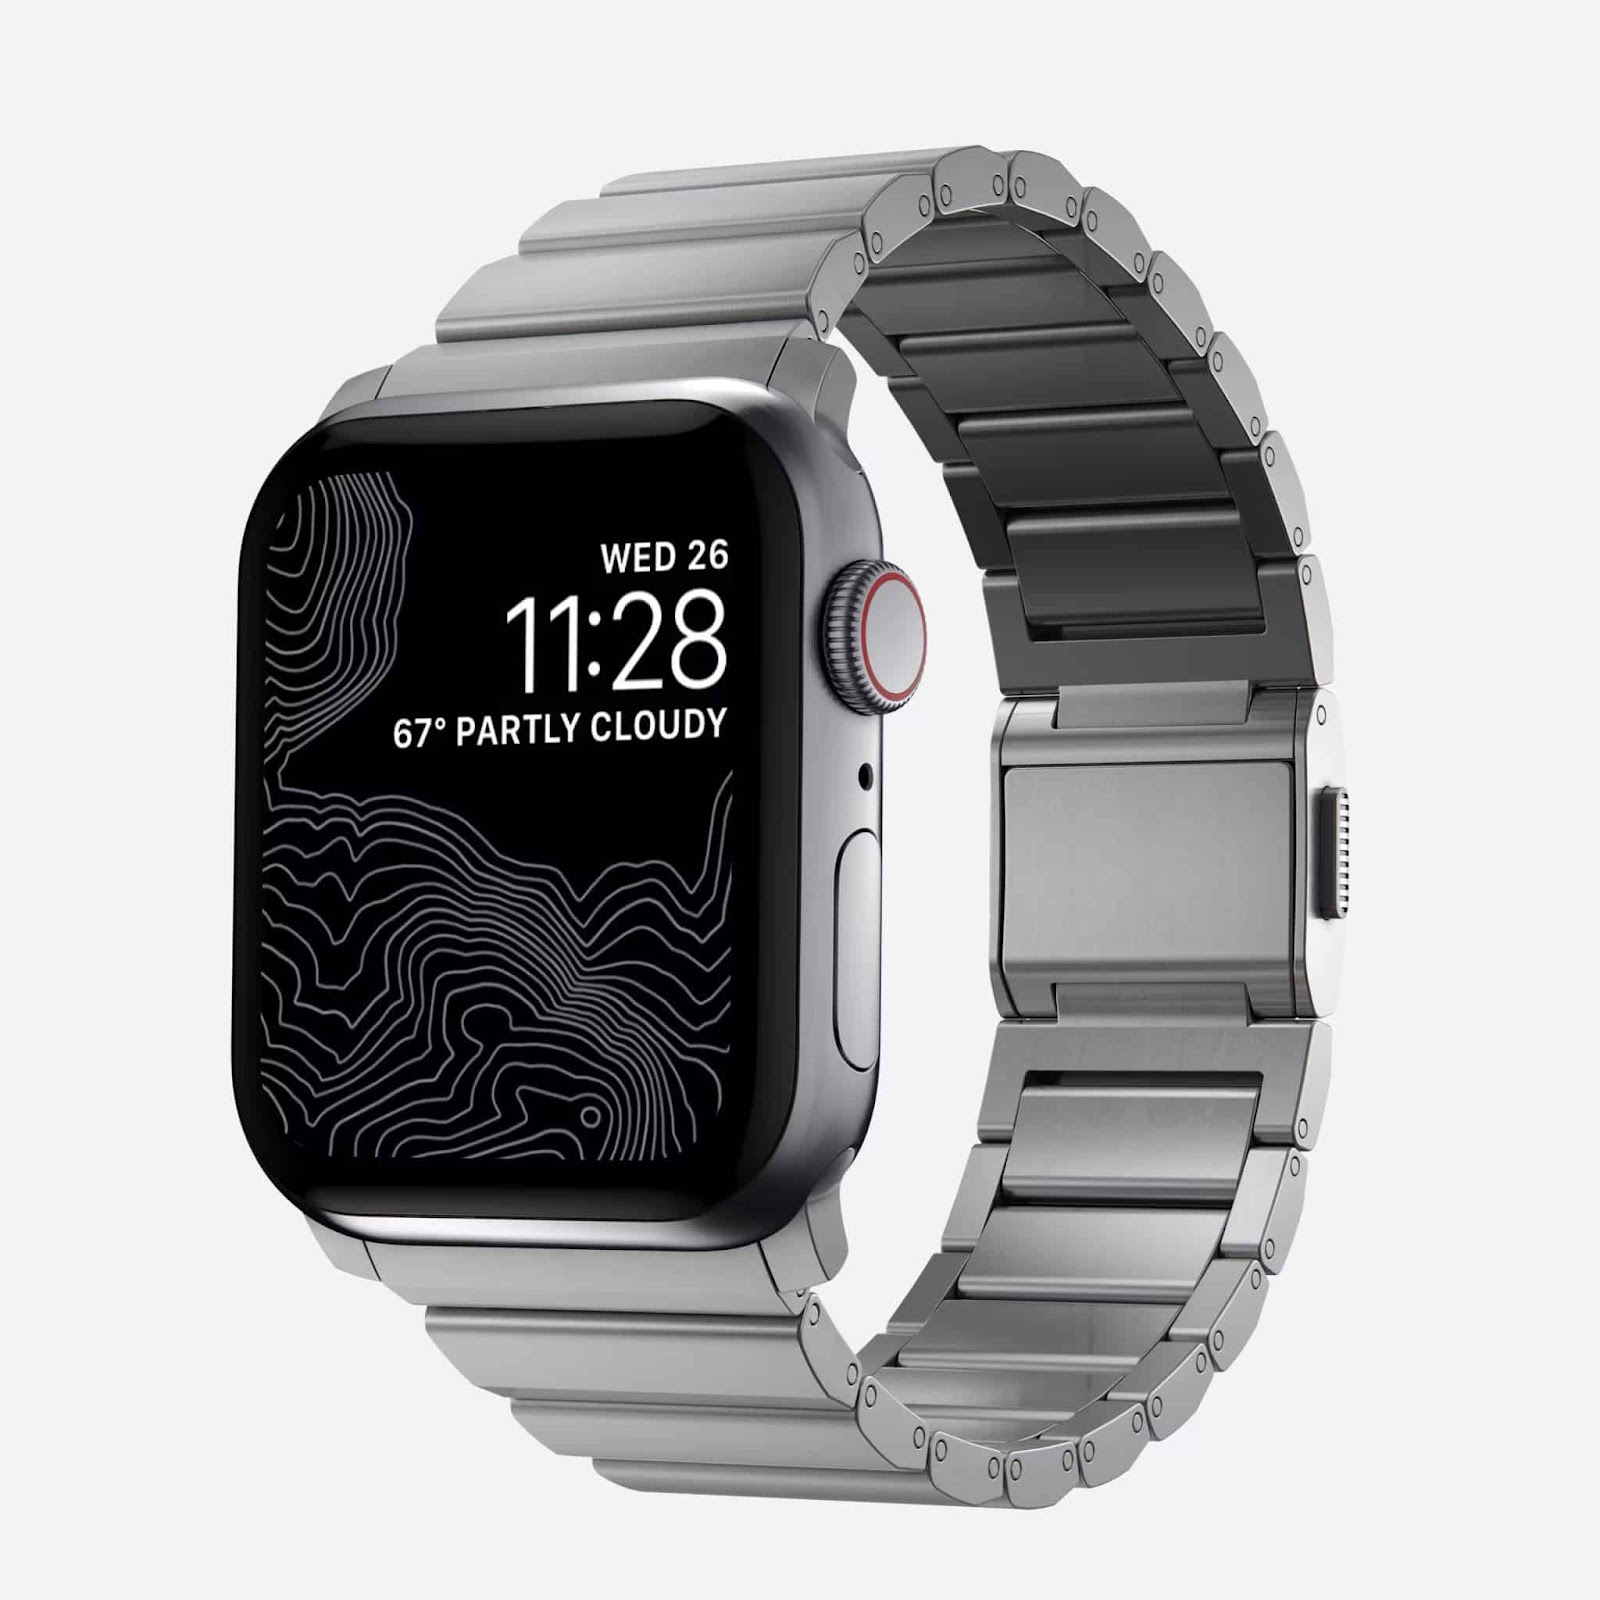 Titanium band for Apple Watch by nomadgood